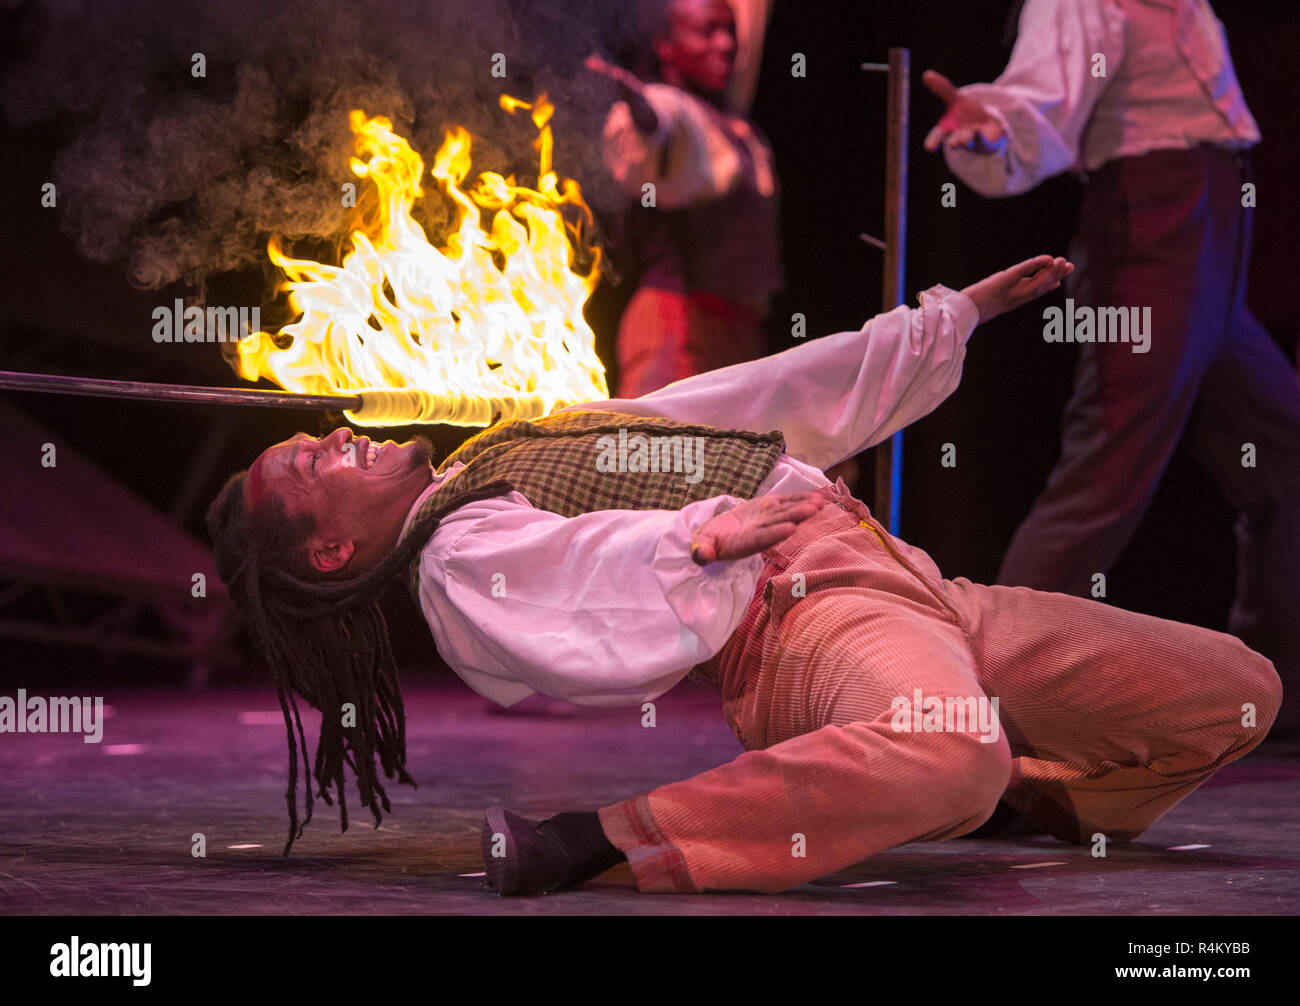 Limbo dancer performs during part of the Berserk stage show at the Festival Theatre in Edinburgh. Stock Photo